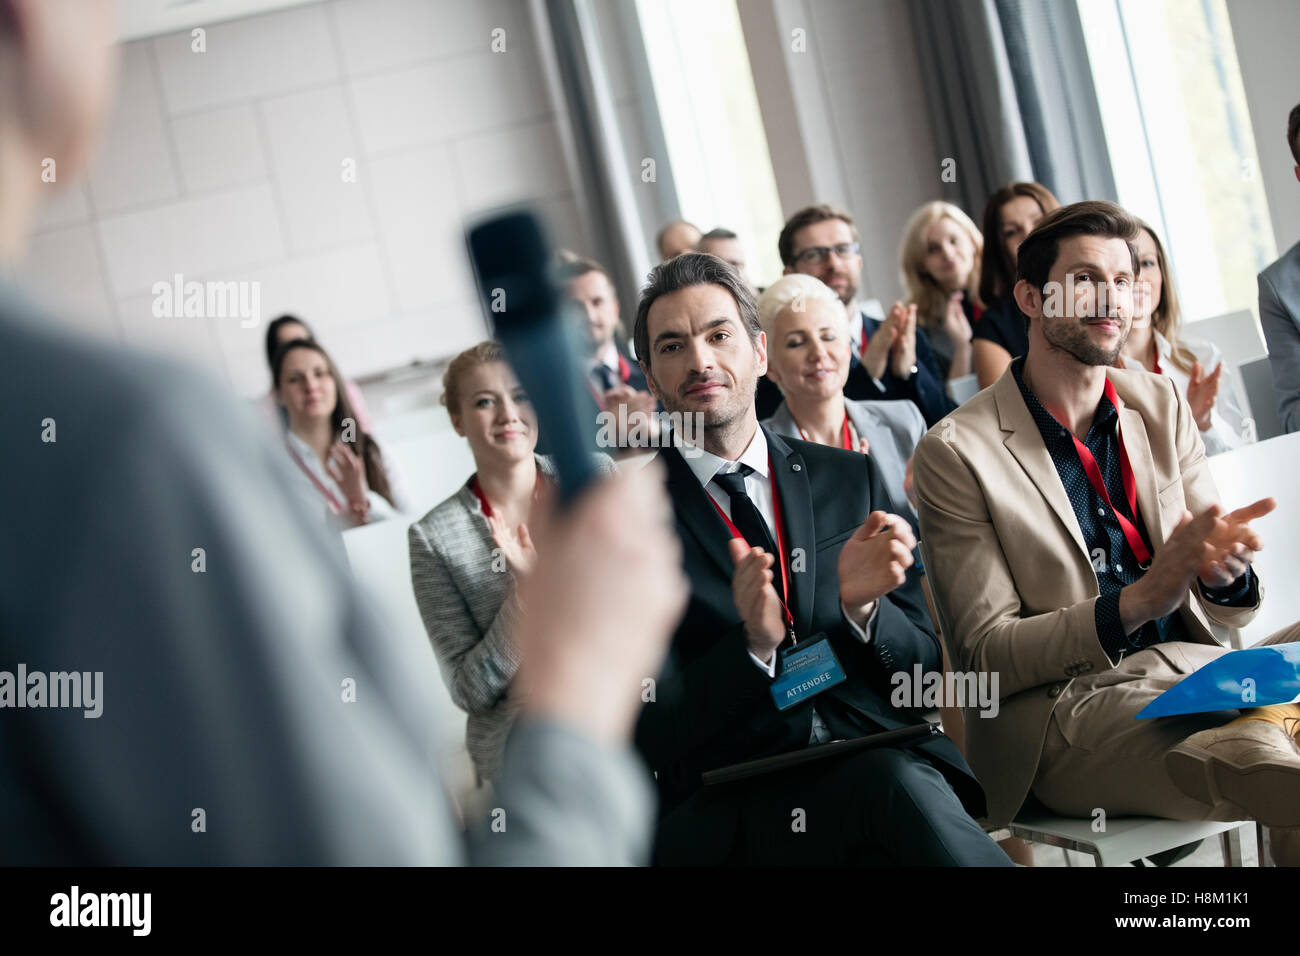 Business people applauding for public speaker during seminar Stock Photo